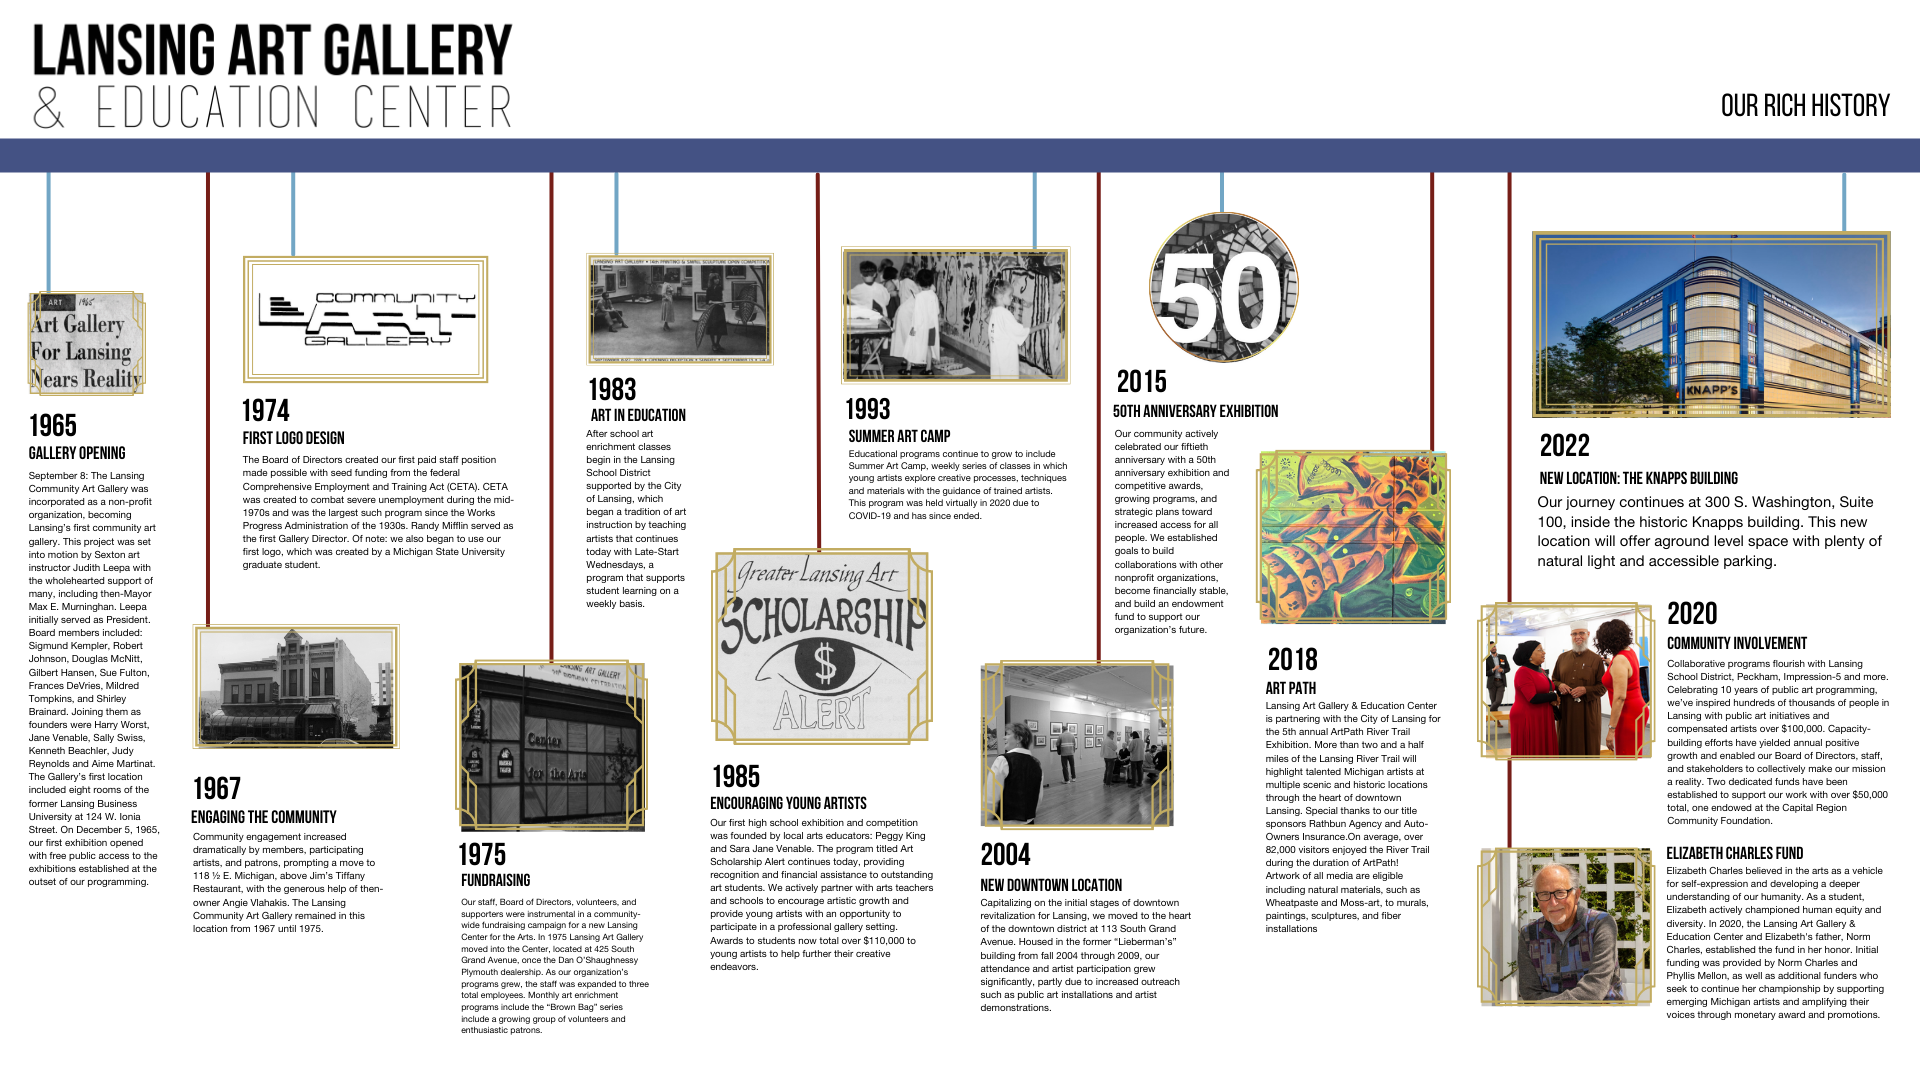 Timeline of the Lansing Art Gallery from 1965-2022